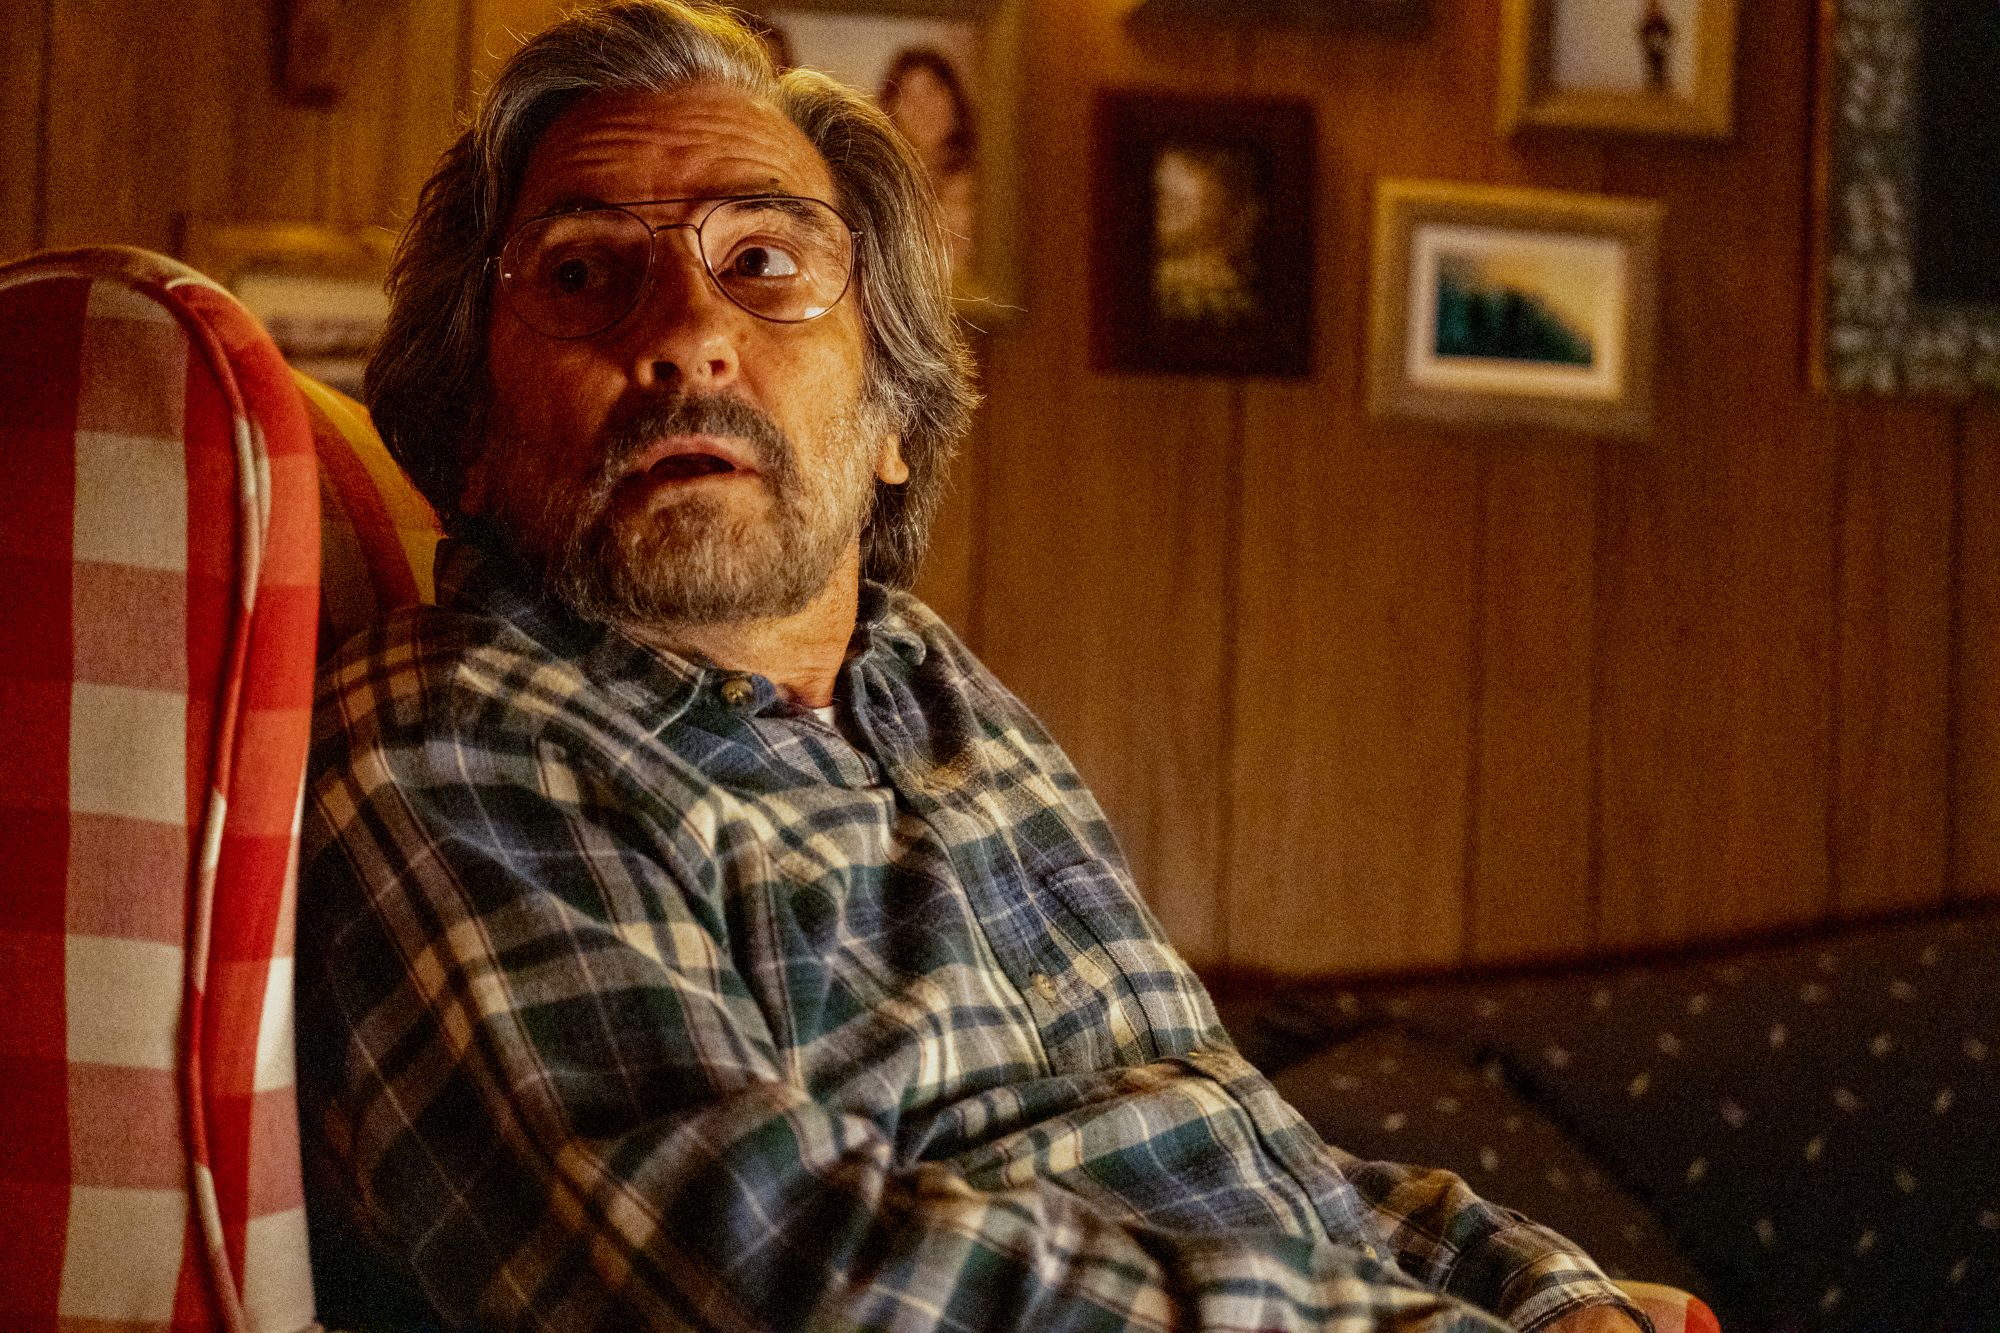 'This Is Us' Season 6 star Griffin Dunne, in character as Nicky, wears a blue plaid shirt and glasses.